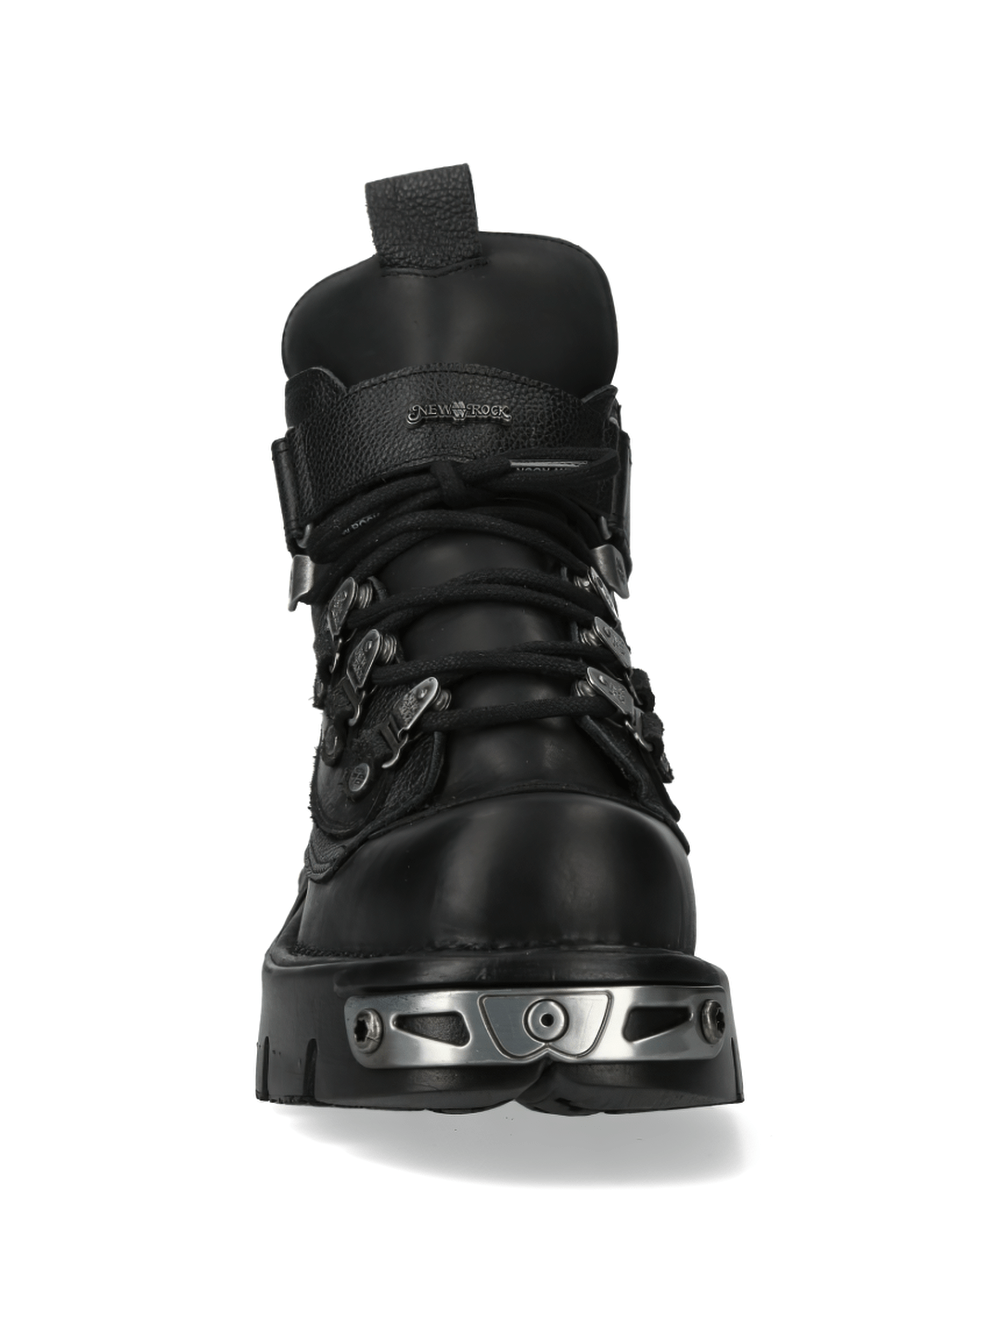 NEW ROCK Gothic Ankle Boots with Metal Details